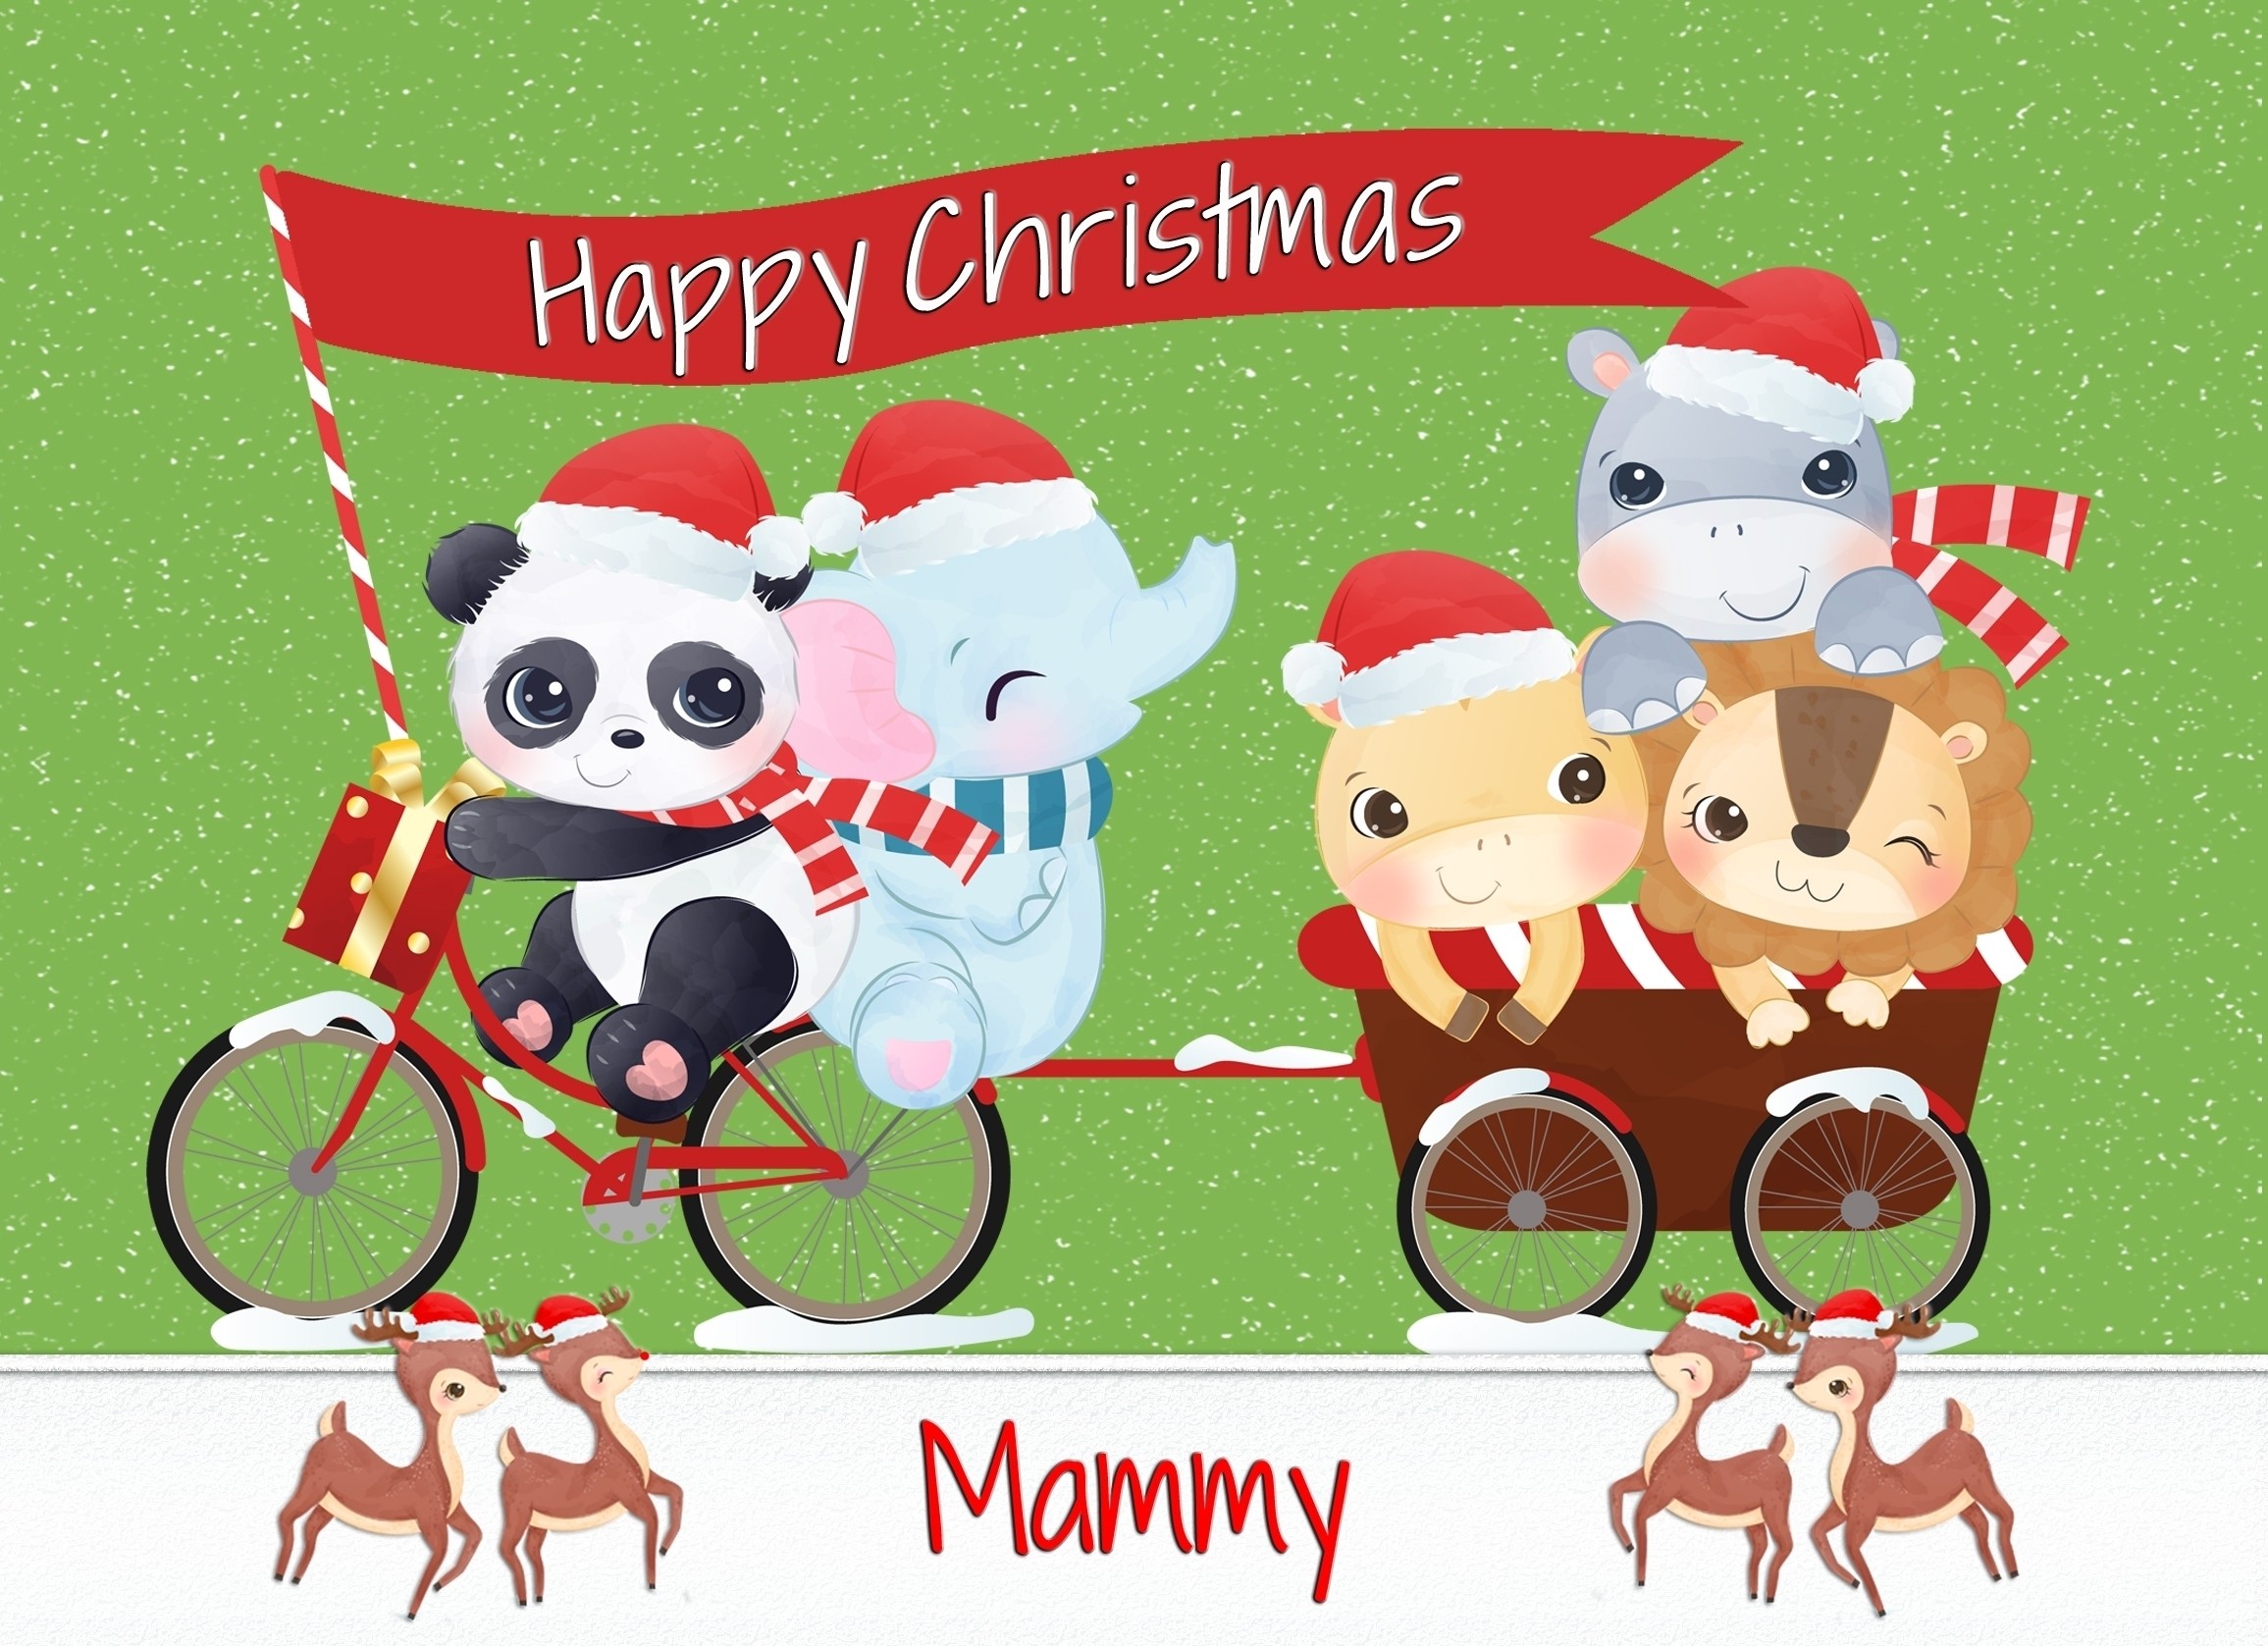 Christmas Card For Mammy (Green Animals)